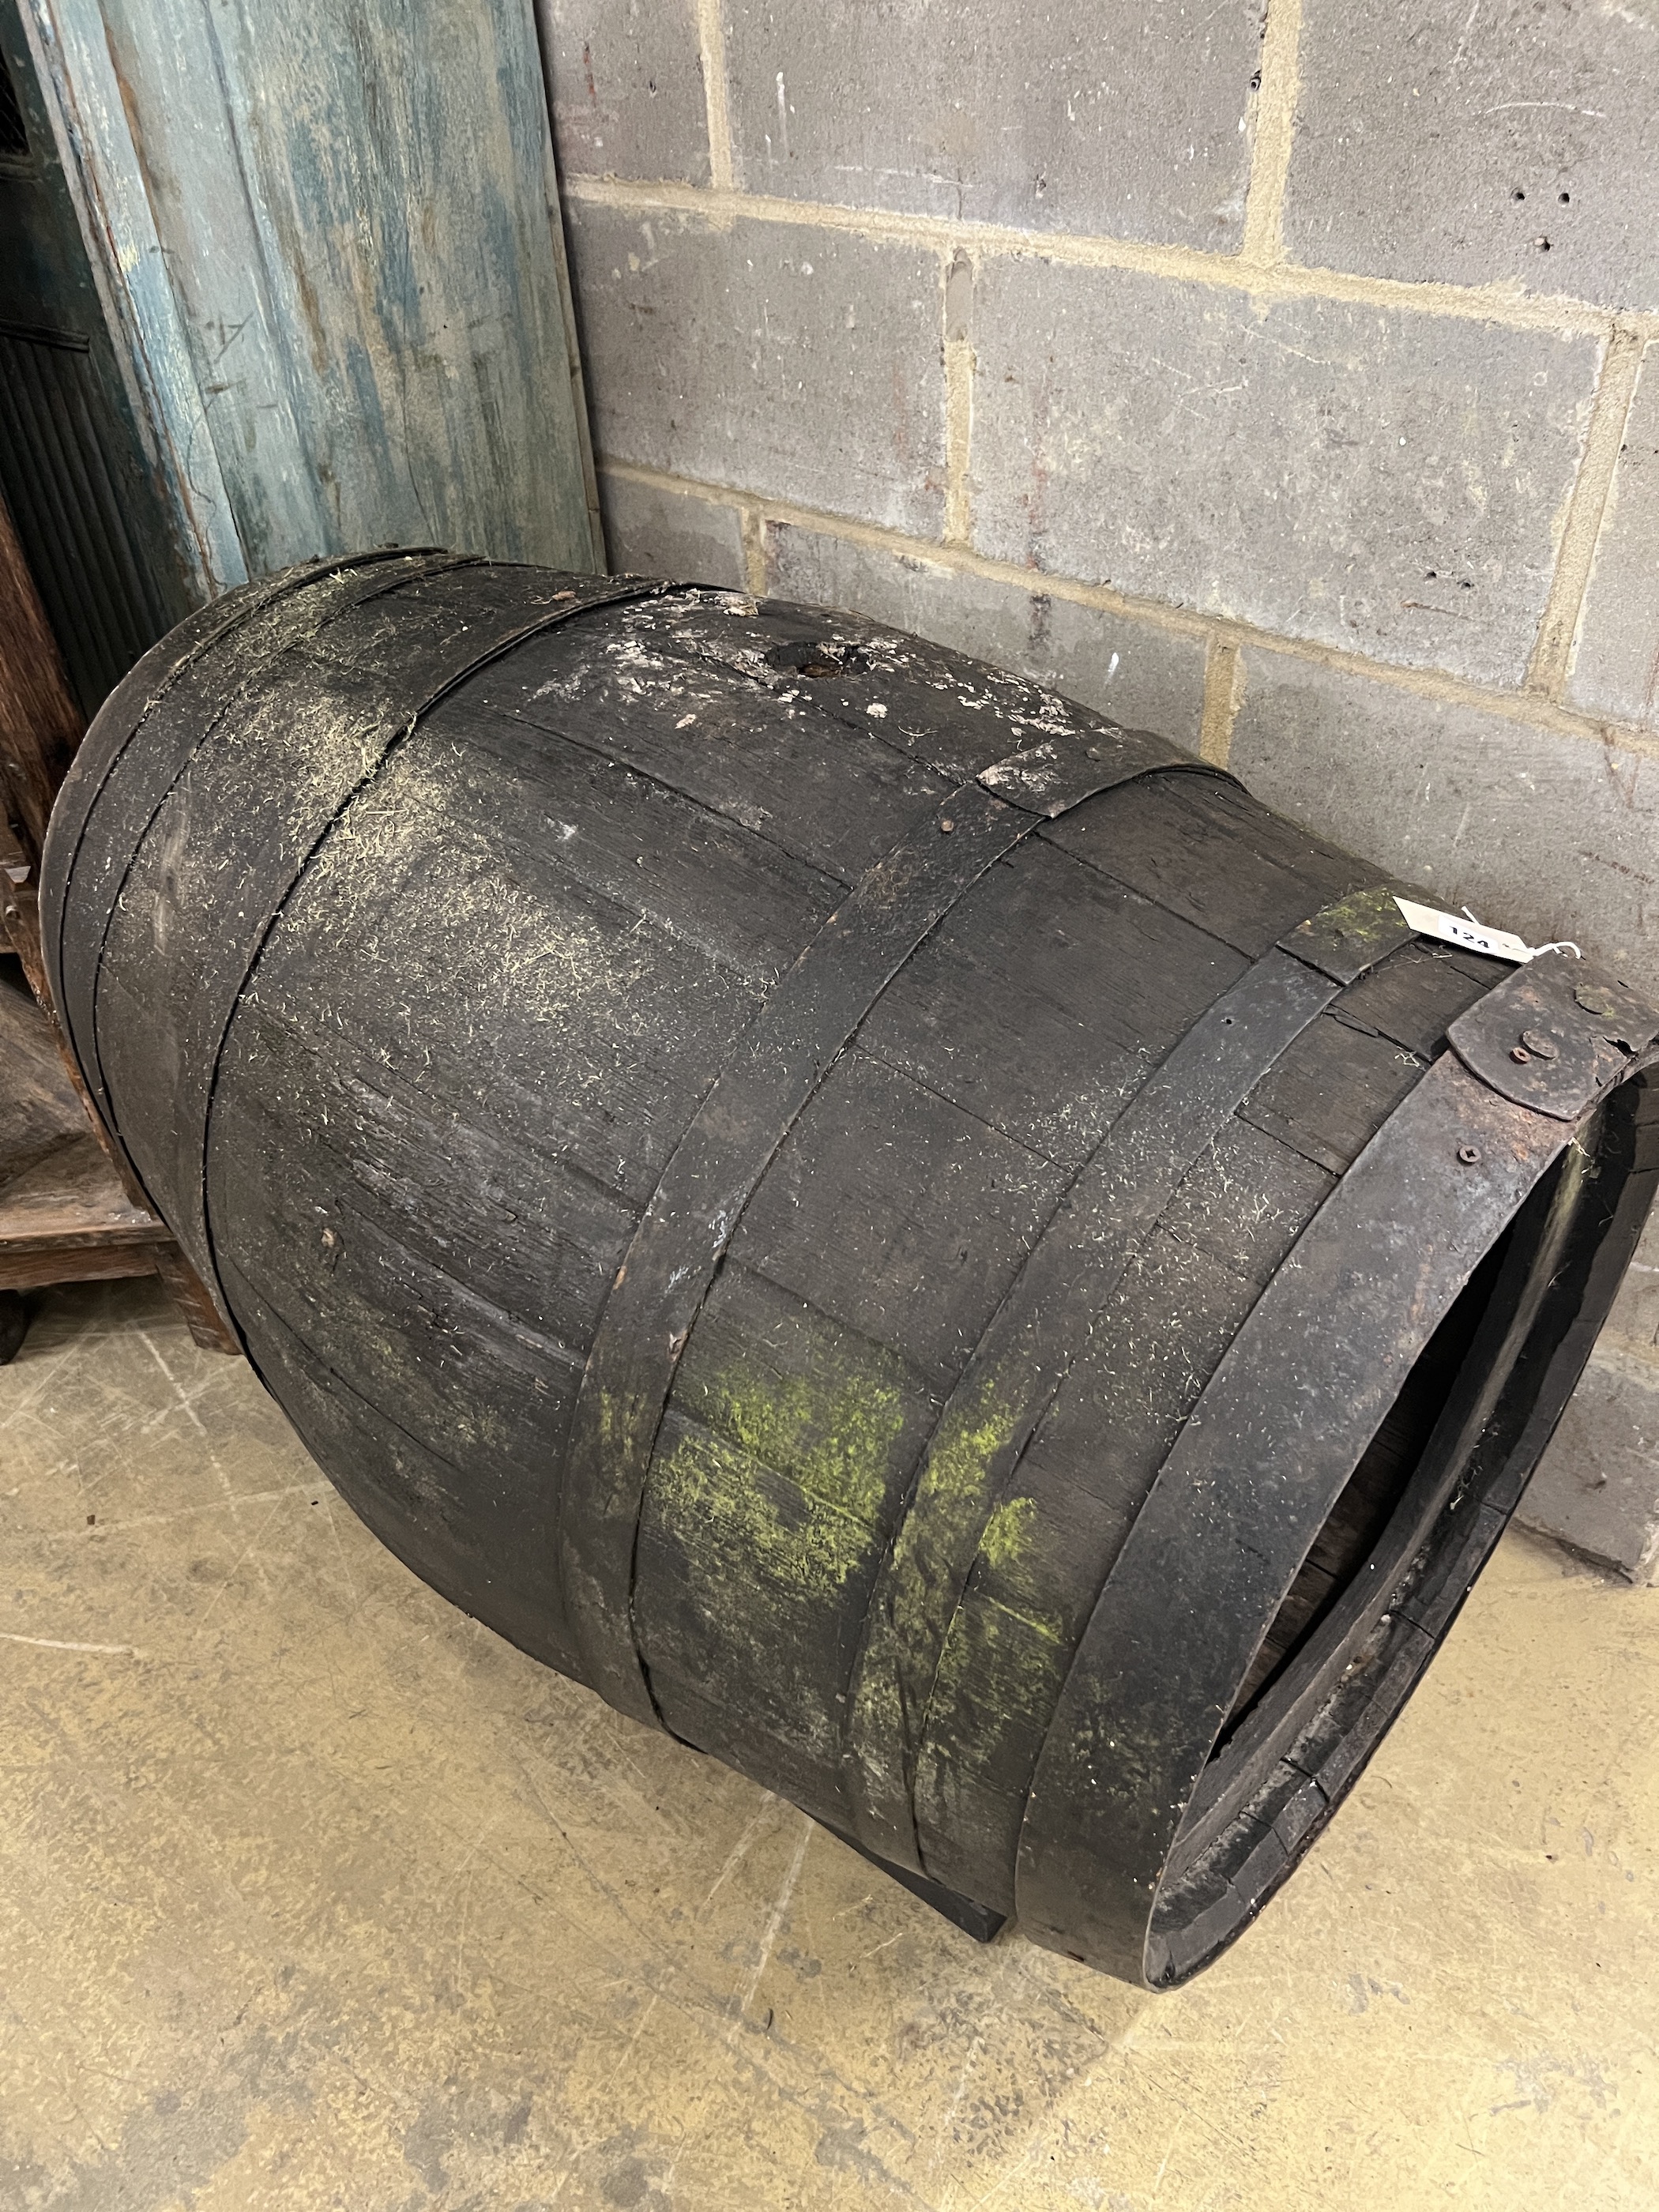 A vintage coopered wine barrel on stand, now converted to a dog's kennel, width 96cm, height 76cm